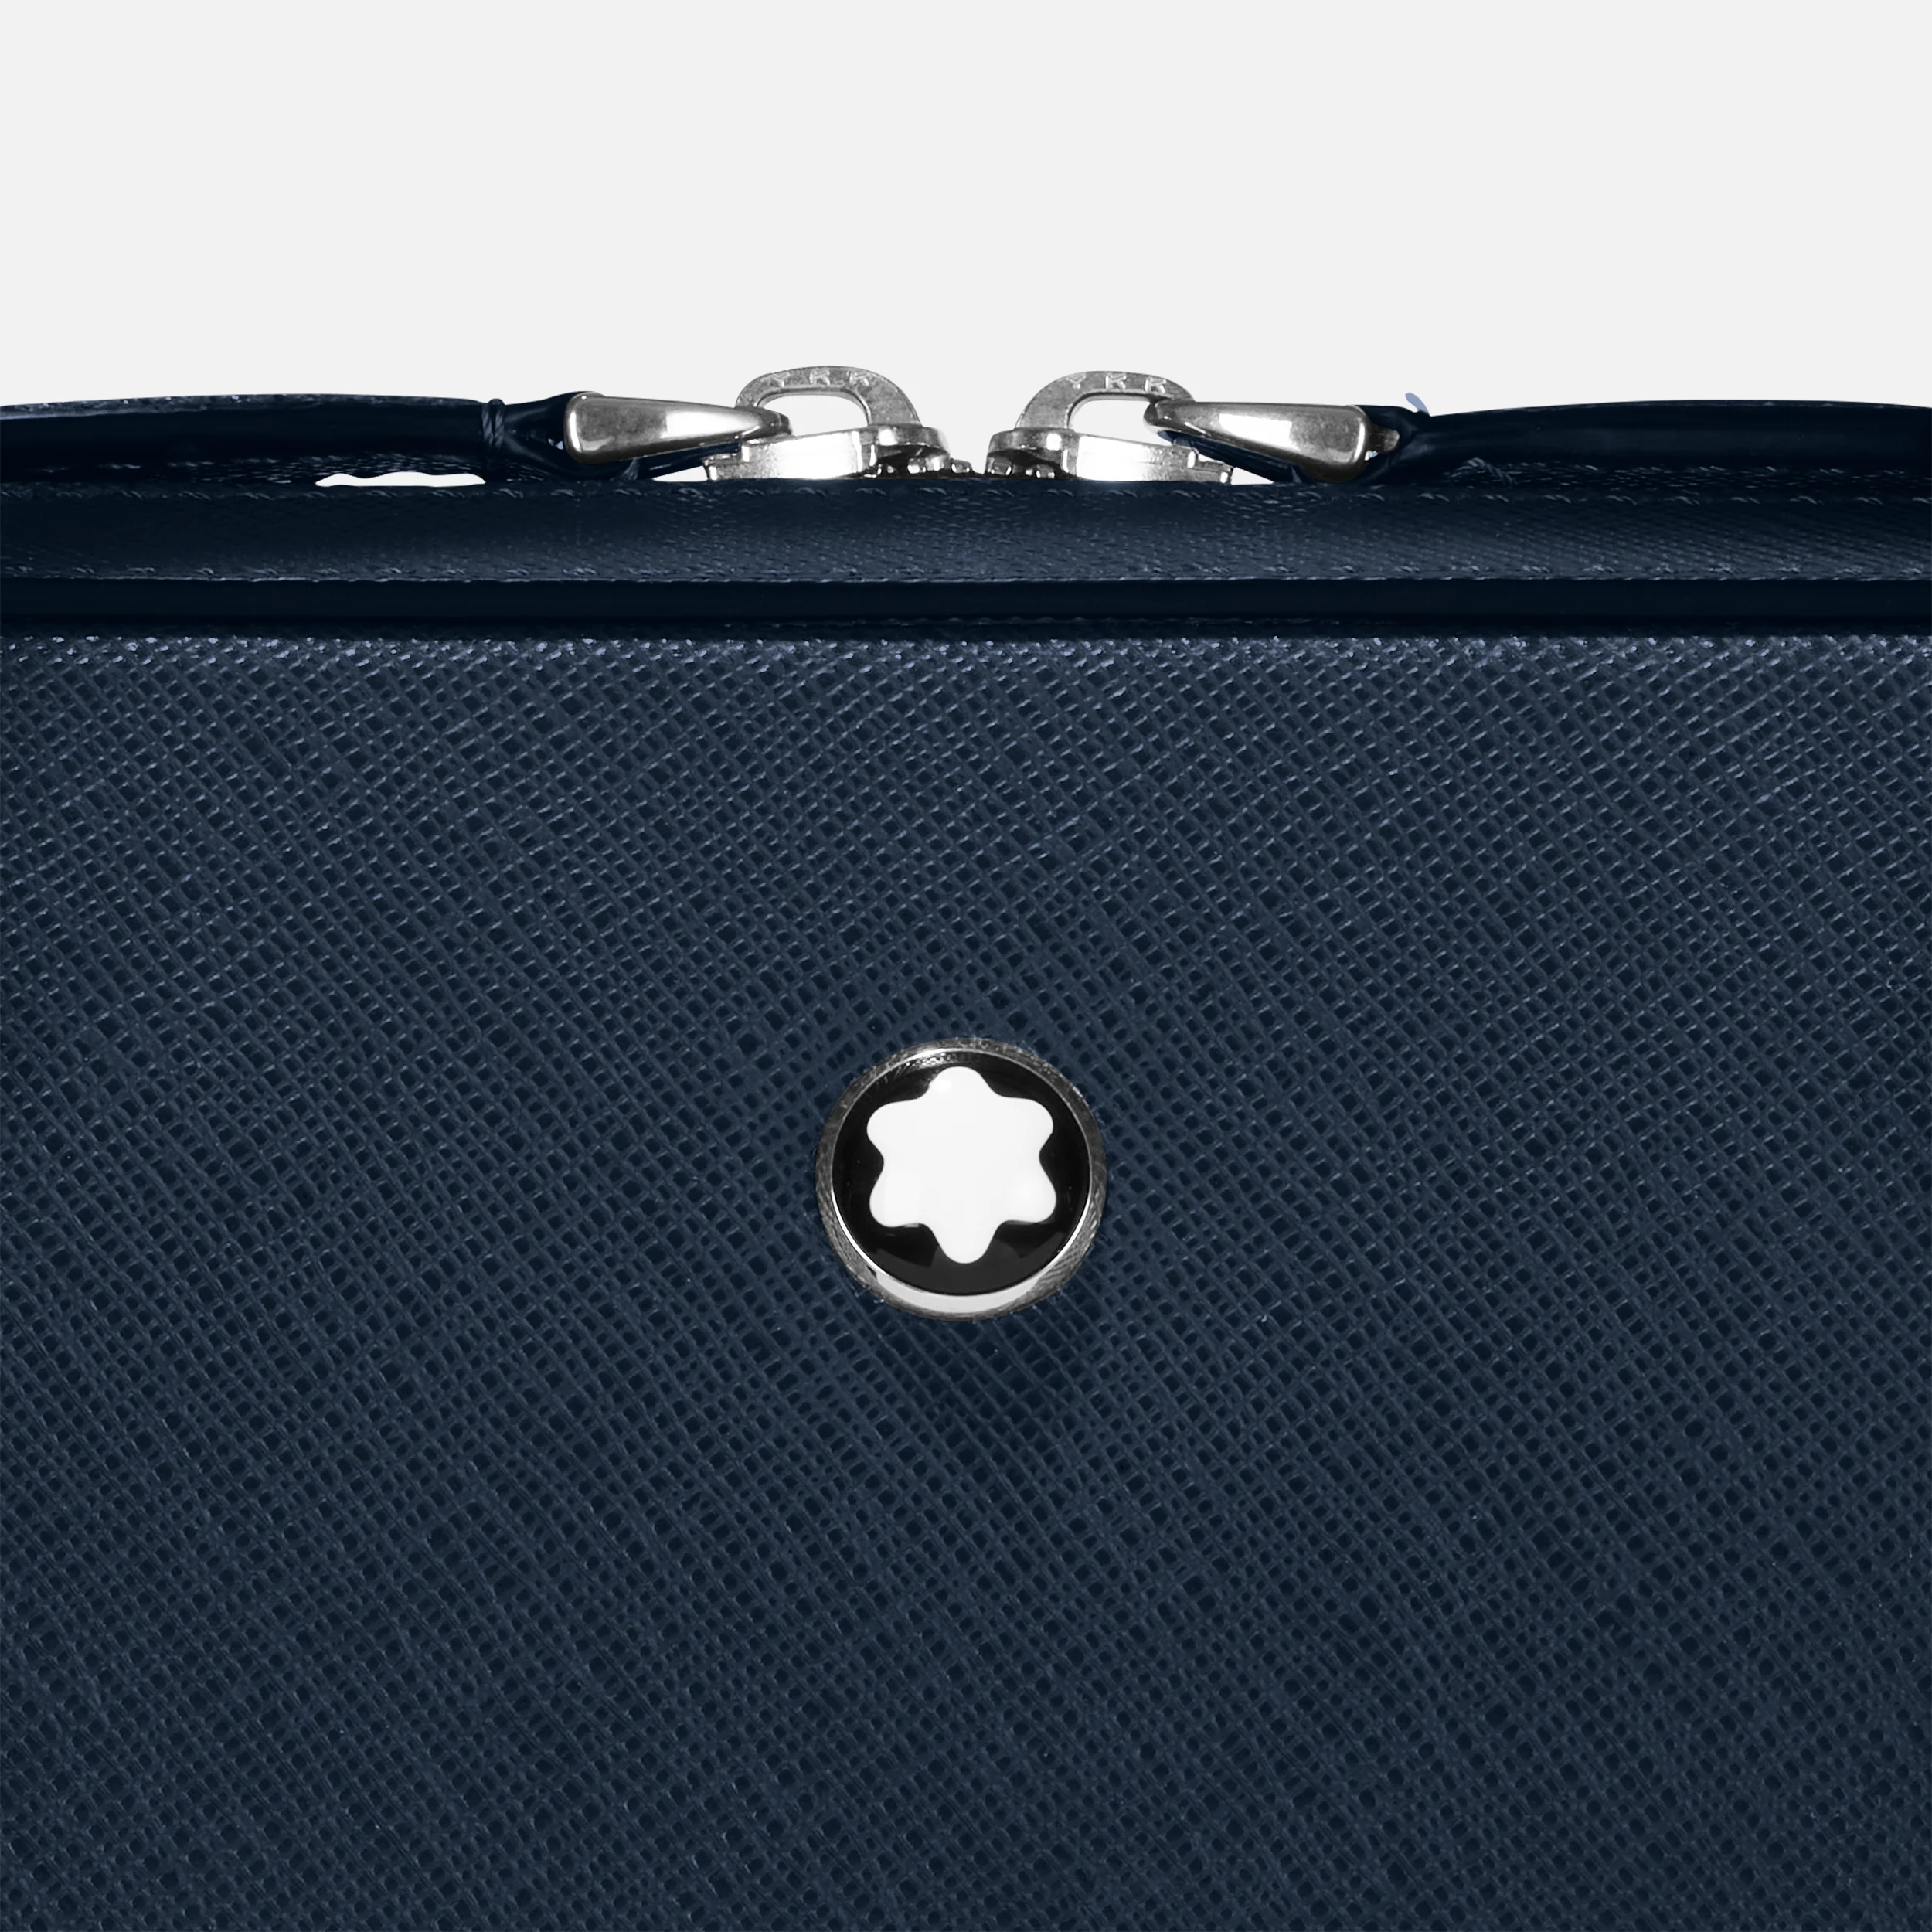 MONTBLANC SARTORIAL THIN DOCUMENT CASE INK BLUE - Pencraft the boutique